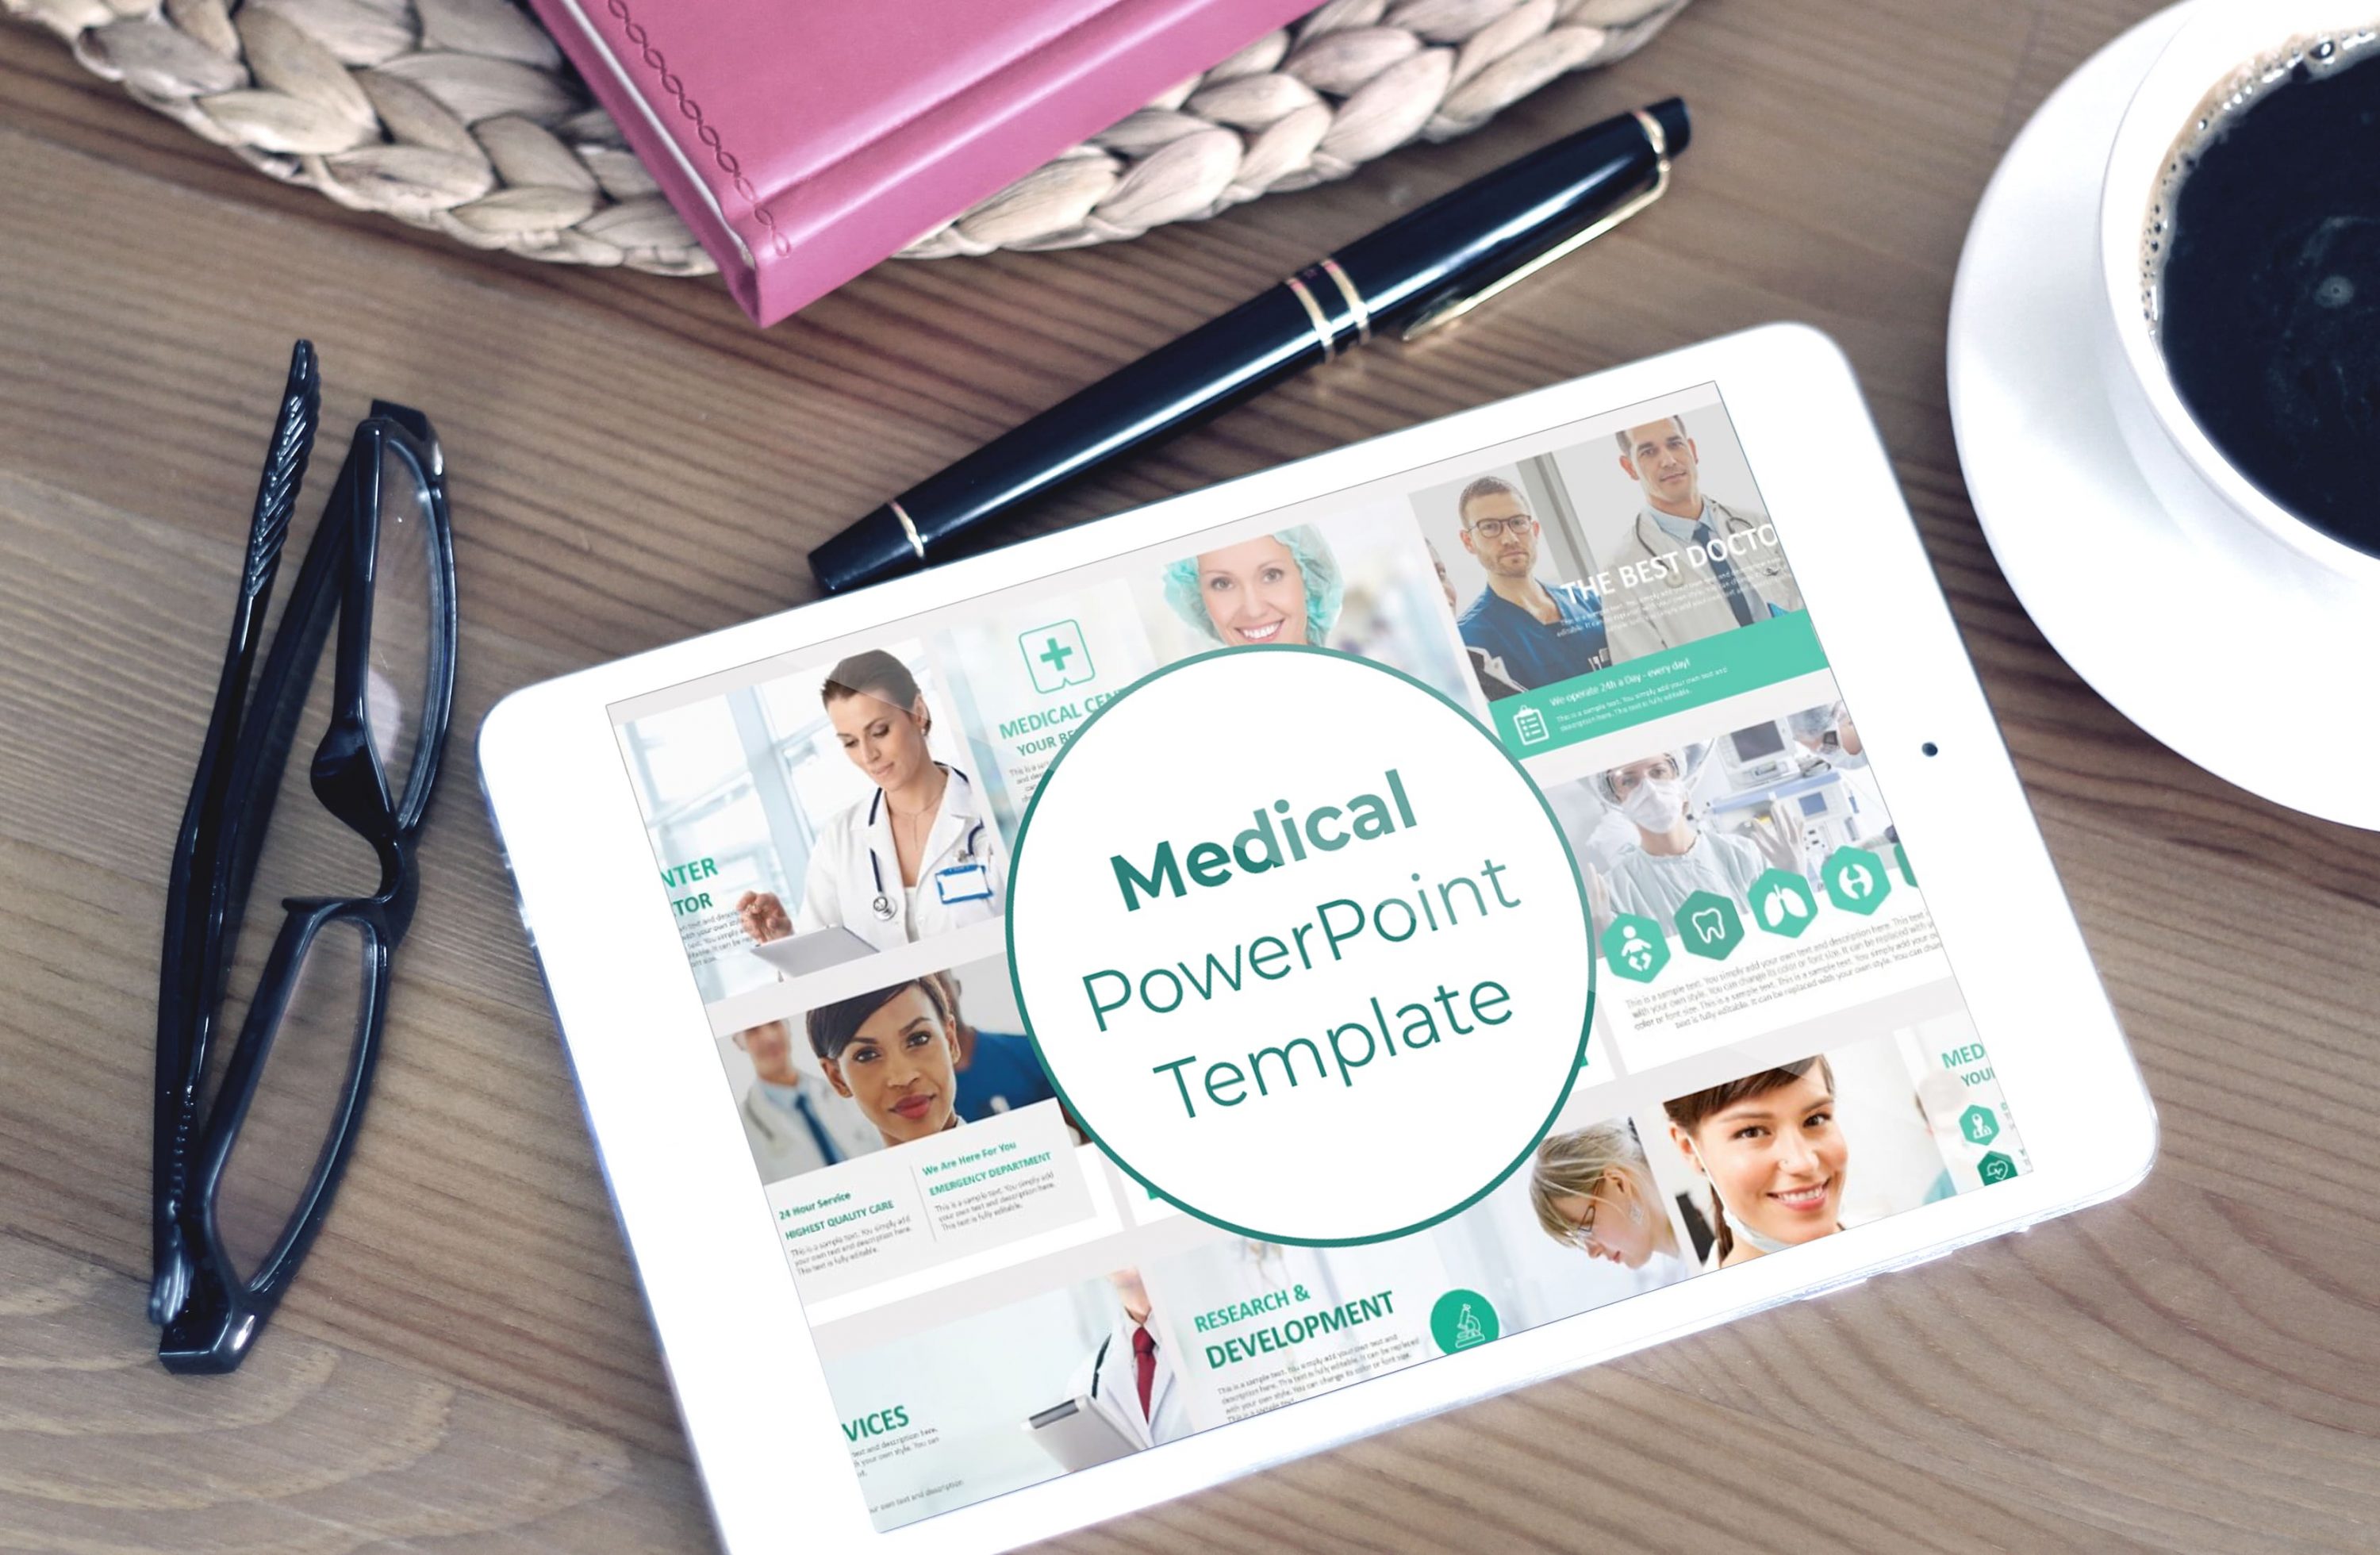 Tablet option of the Medical PowerPoint Template Pinterest.